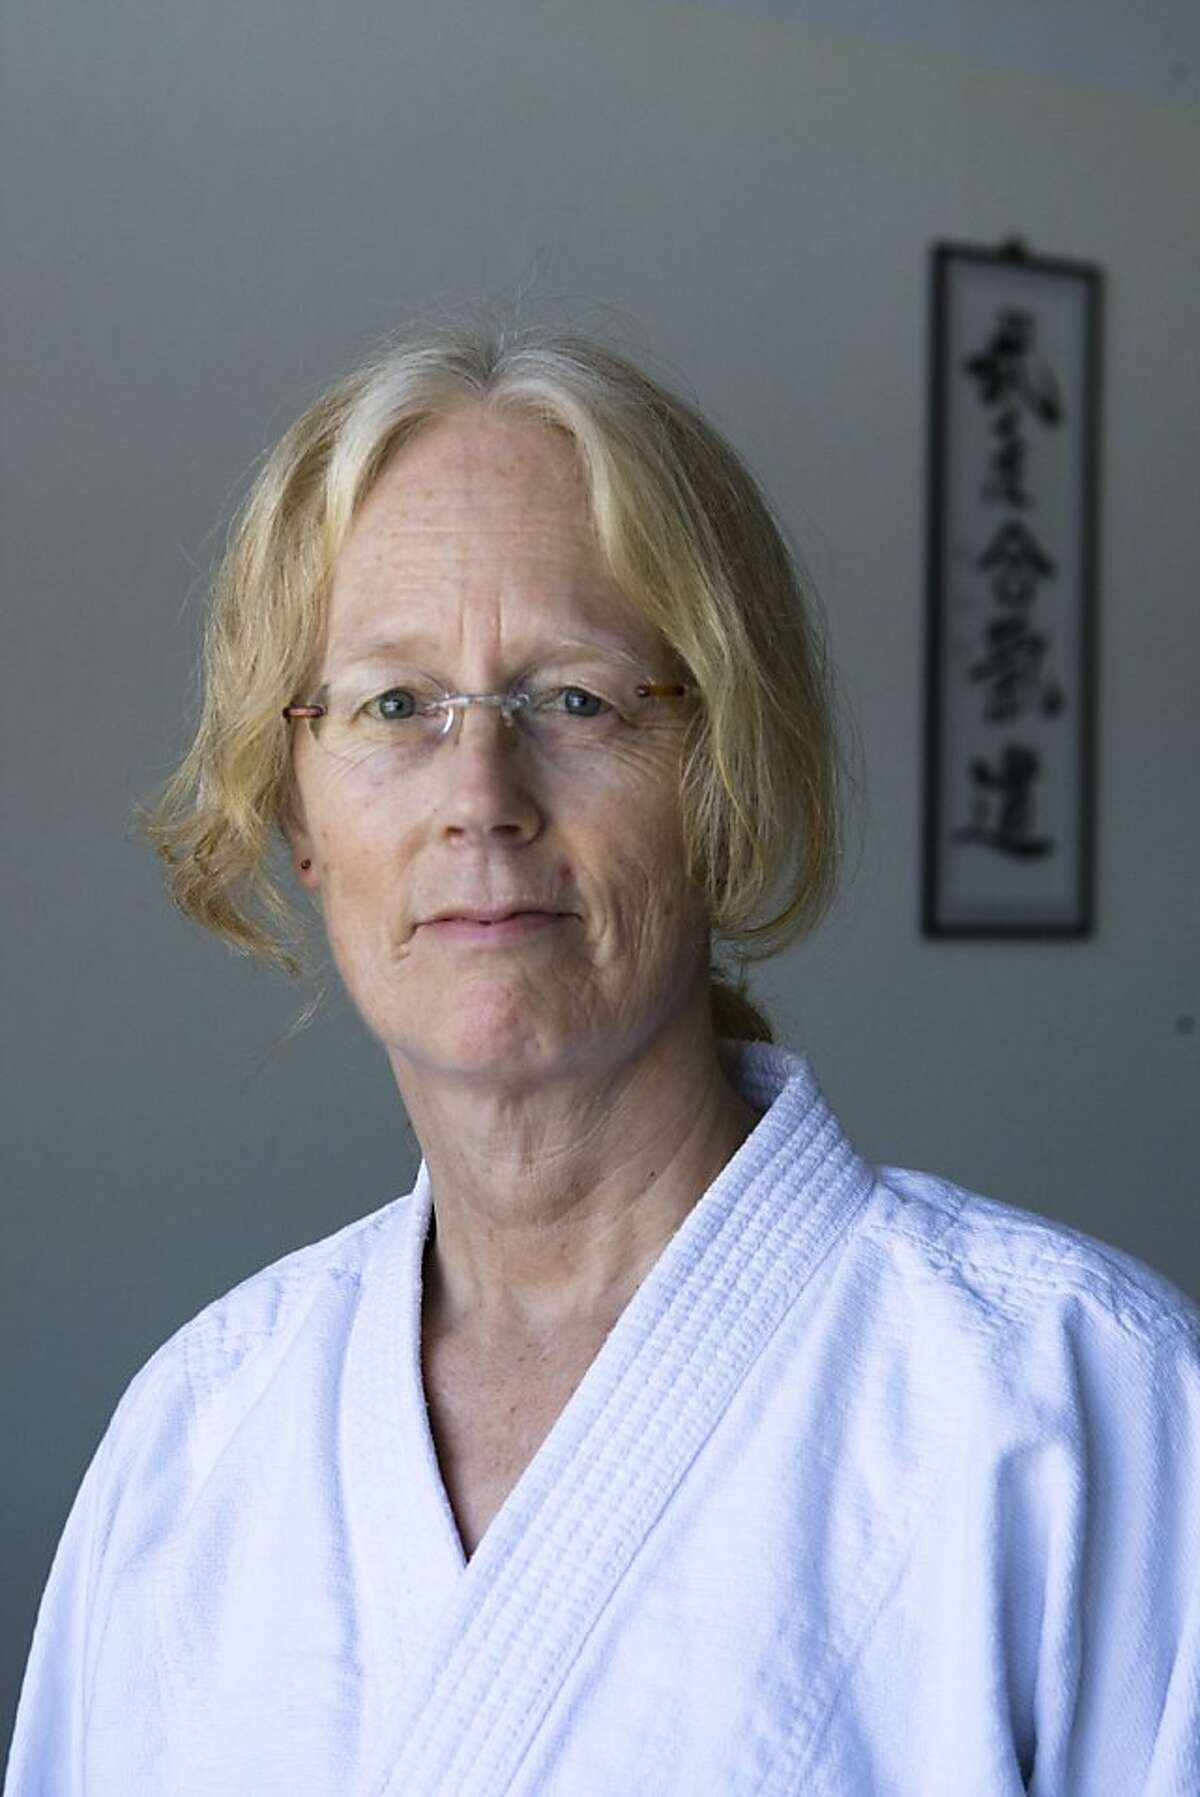 Author and renowned Aikido teacher Linda Holiday poses for a portrait at Heart of San Francisco Aikido in San Francisco, Calif. on Sunday, Sept 8, 2013.